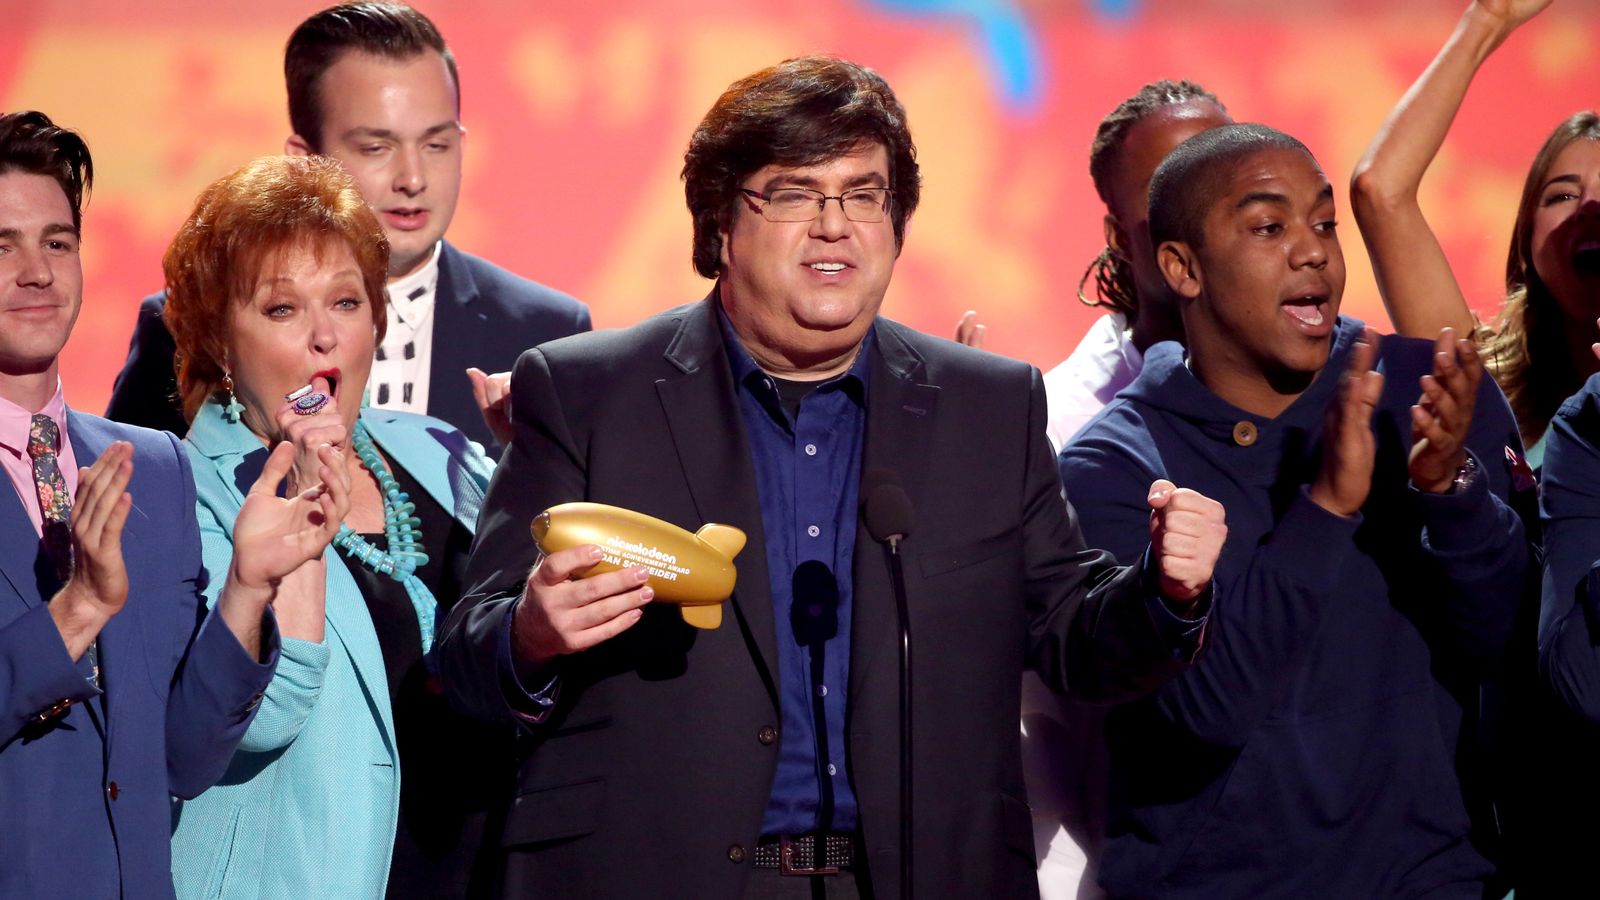 Nickelodeon showrunner Dan Schneider apologises after claims of abuse and inappropriate behaivour